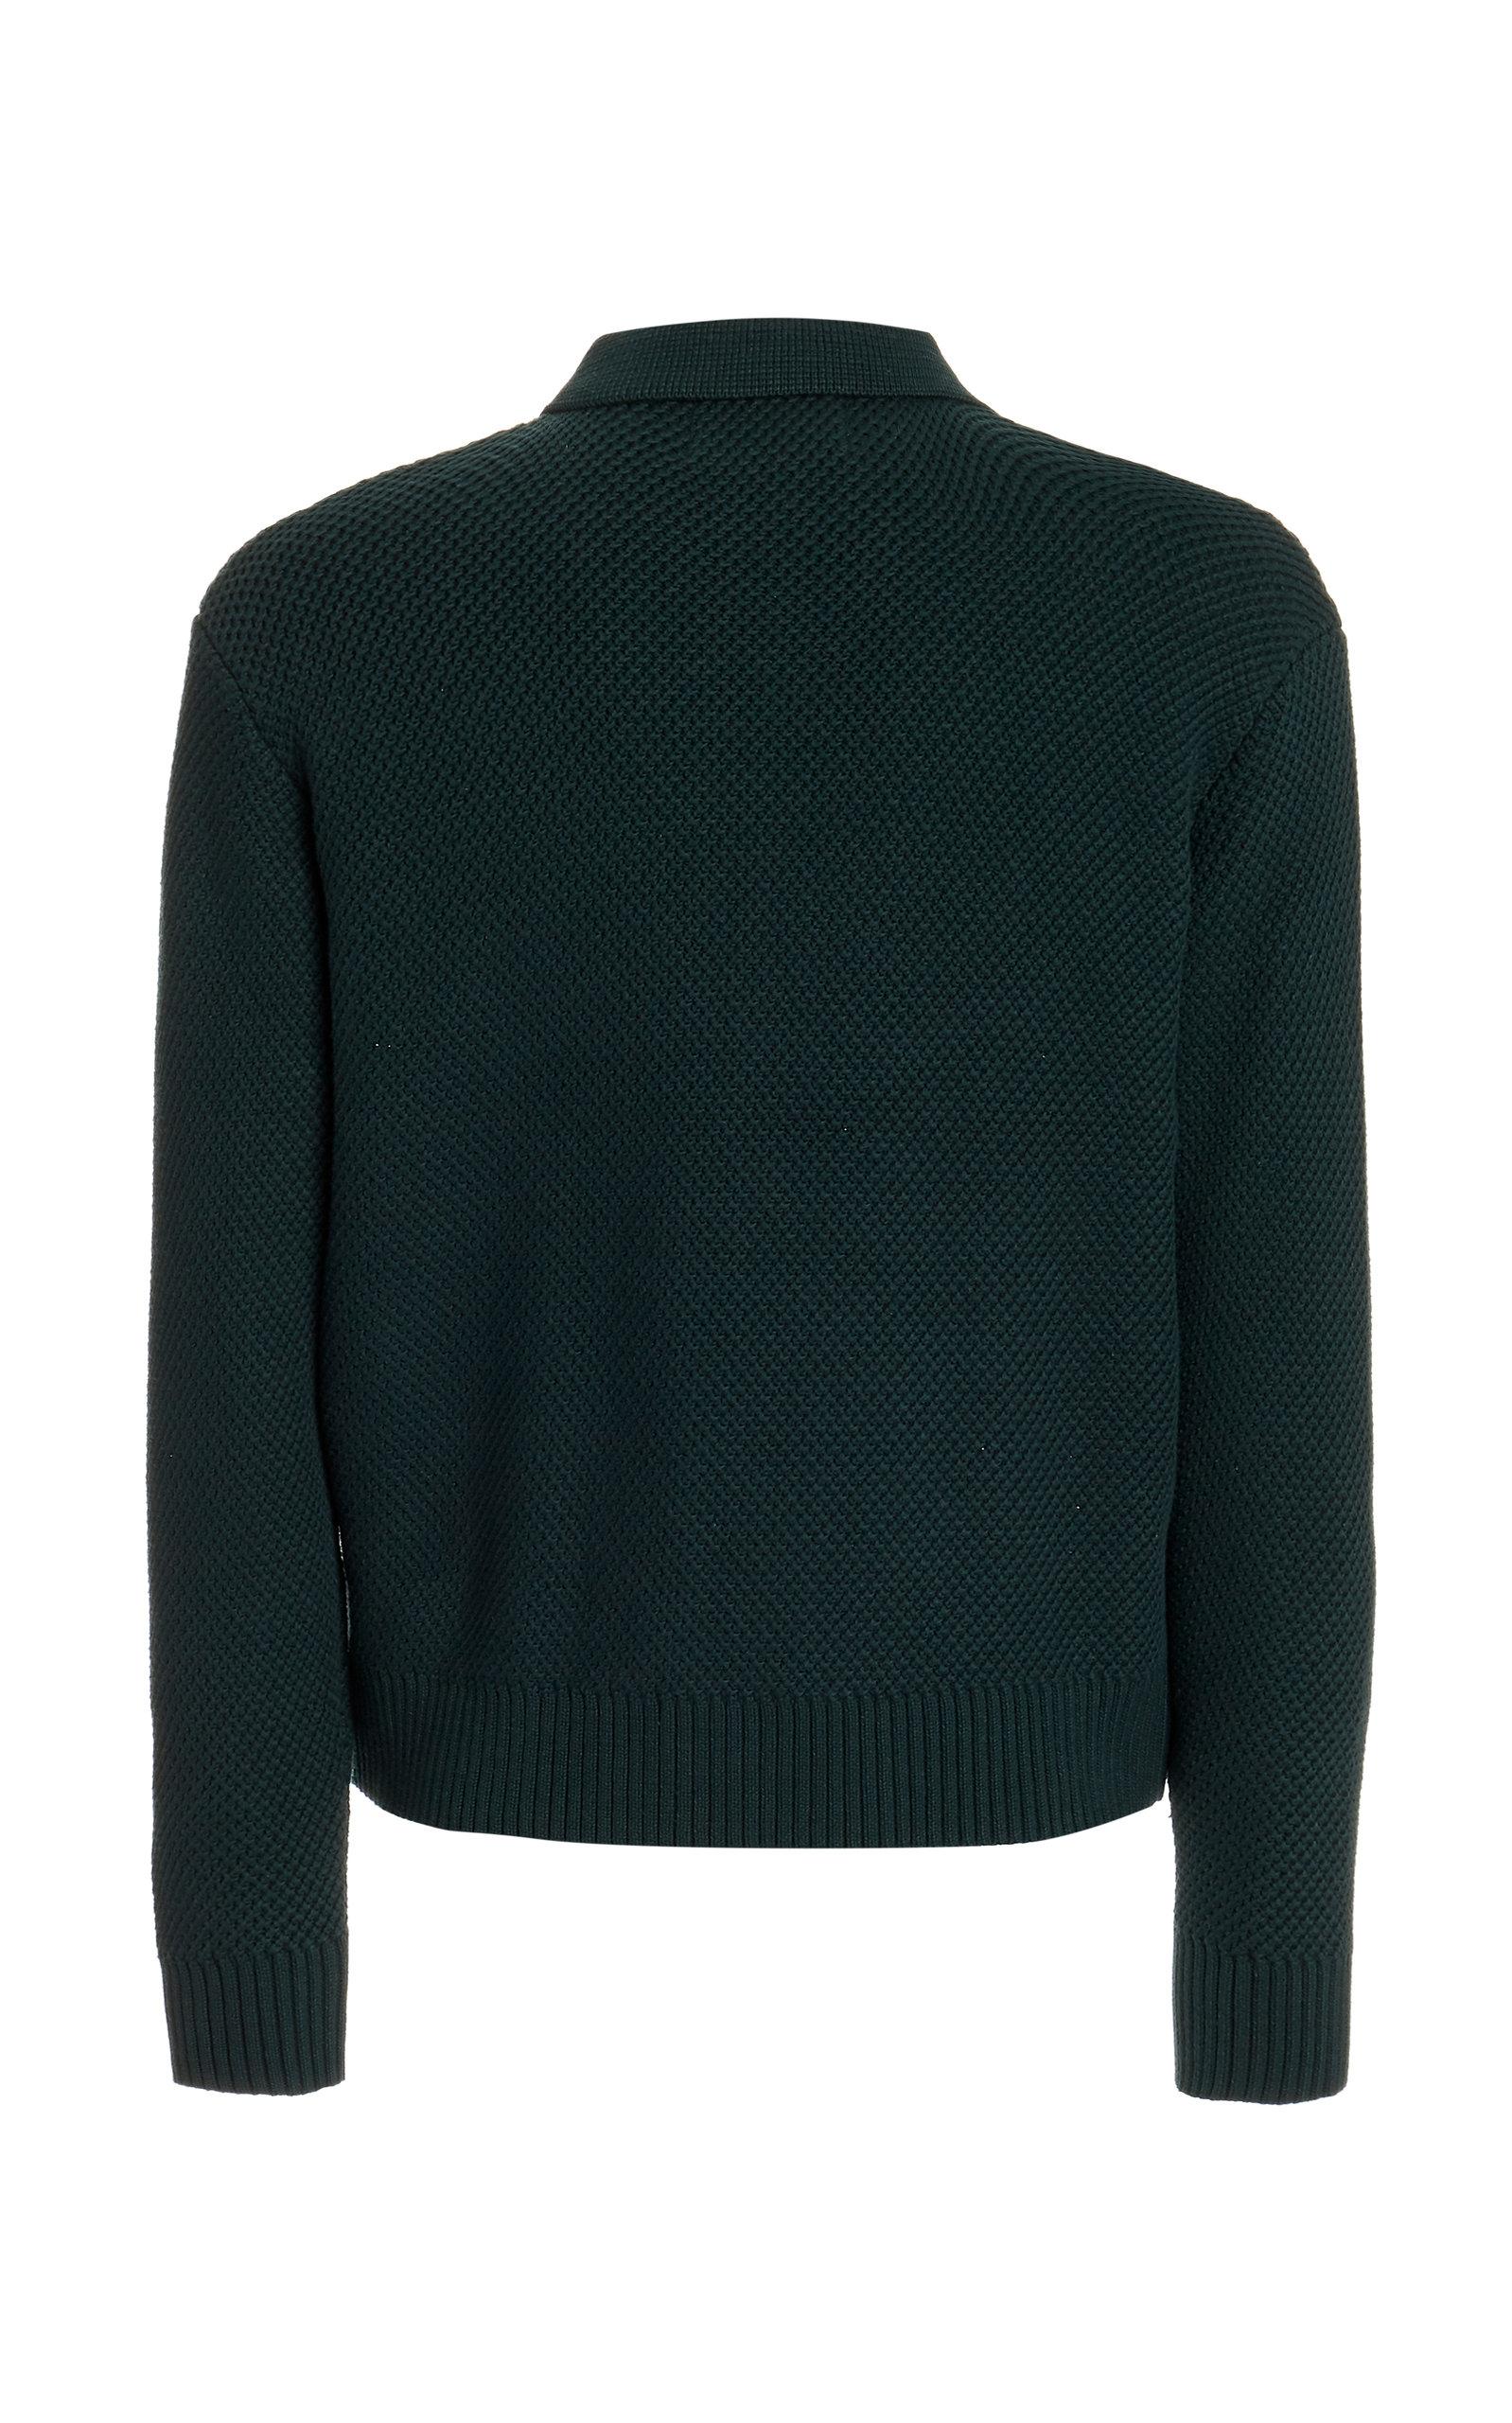 CASABLANCA Knitted Cotton Tracksuit Sweater in Green for Men - Lyst